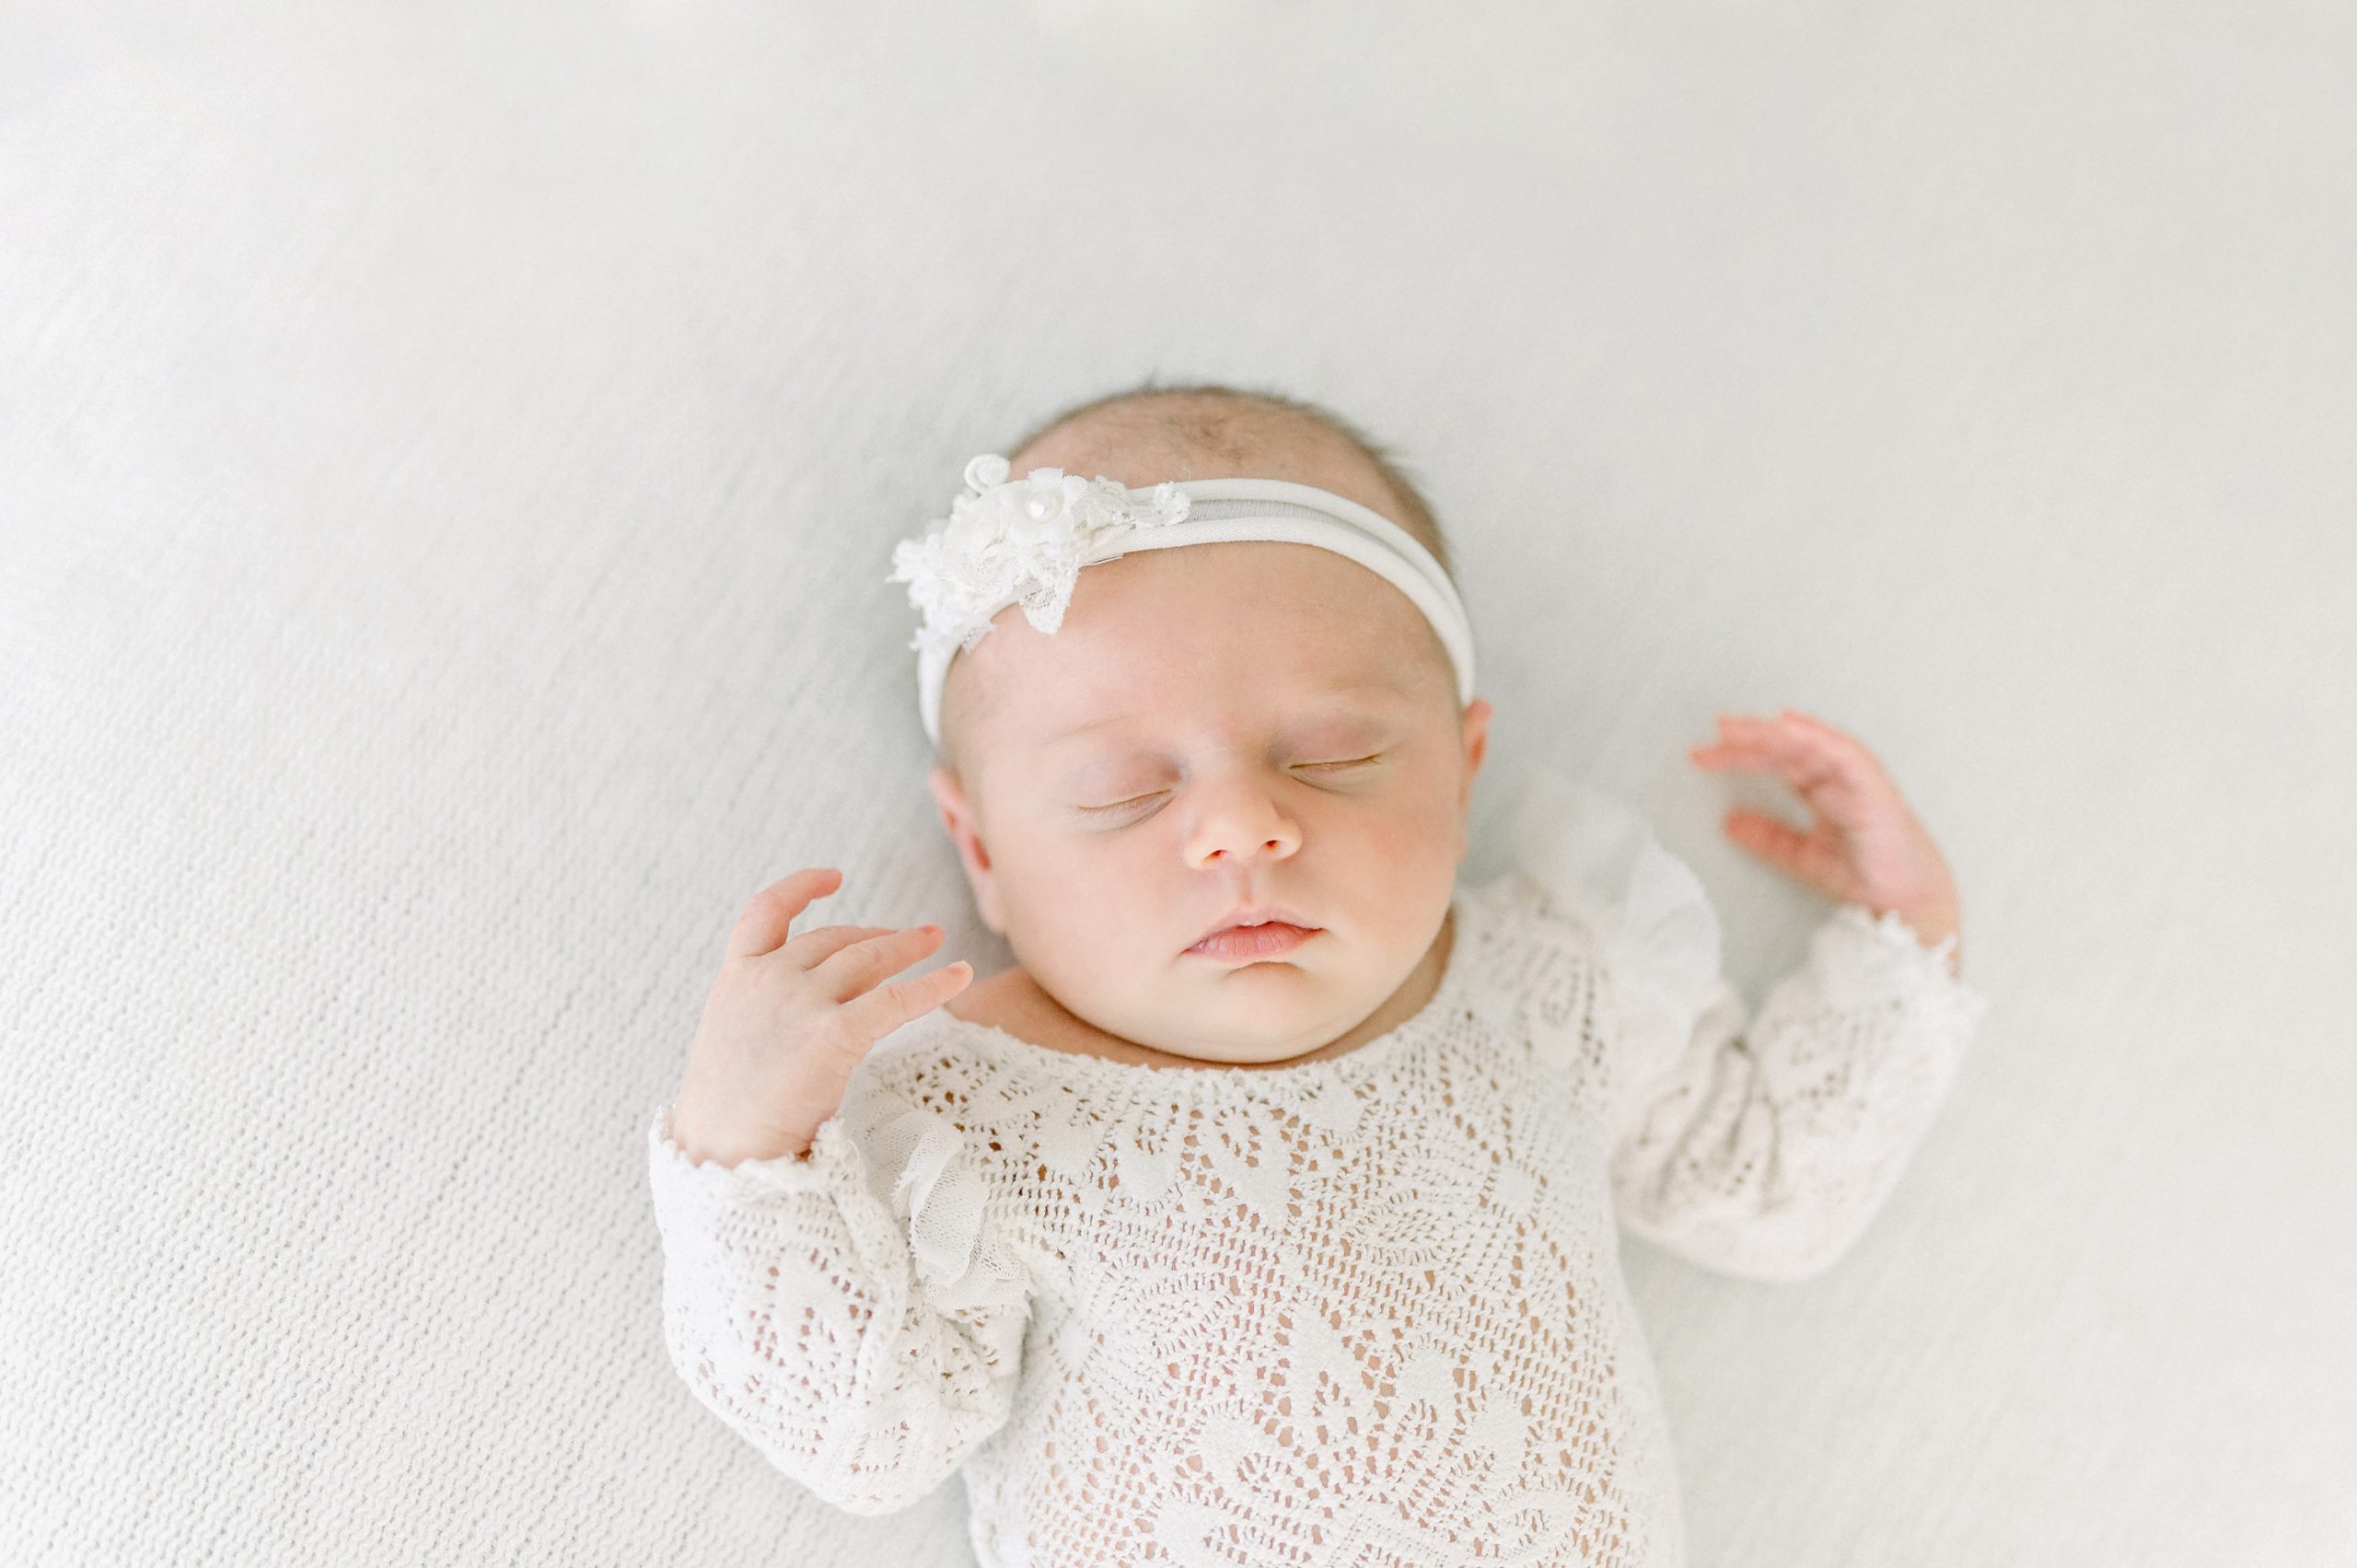 A family of 4 welcomes their new daughter by doing newborn portraits in a bright white studio in Centennial Colorado.